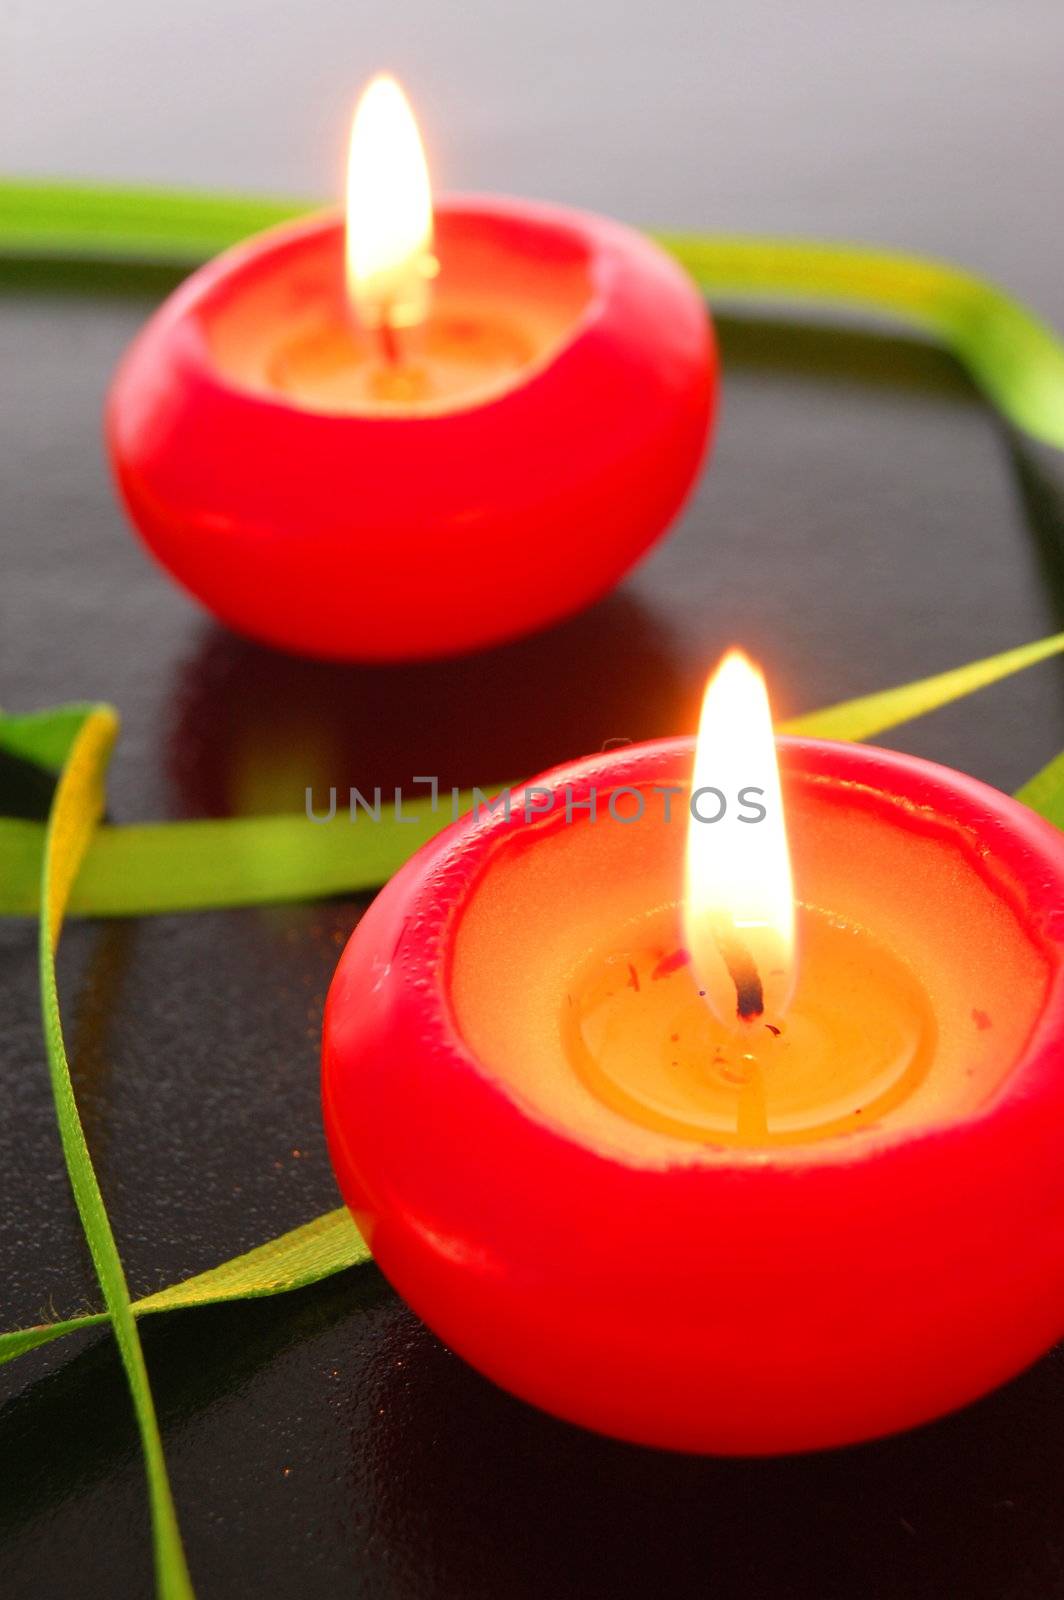 red candles with warm light showing love or romance concept     